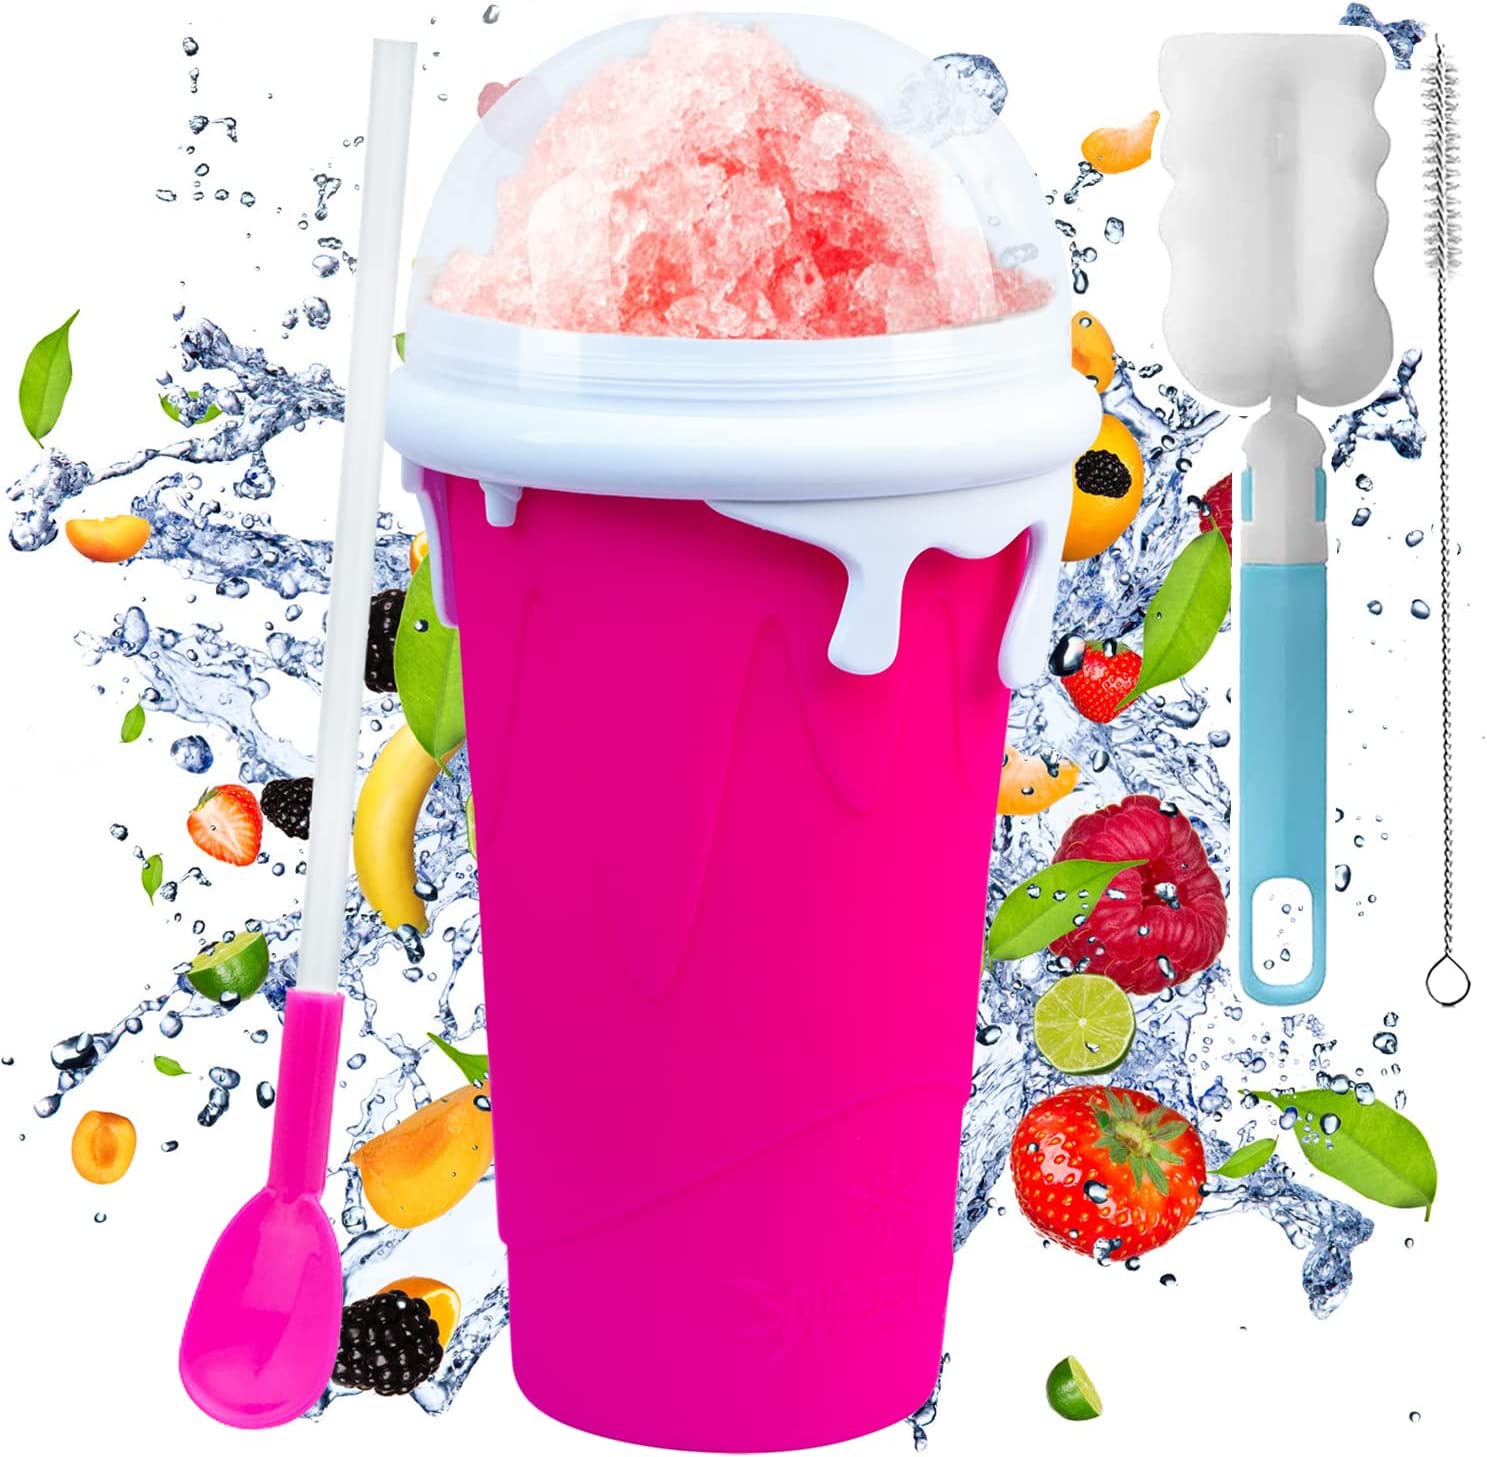 [Upgrade 500 ml] Slush Cup Silicone Squeeze Cup Slush Ice Cream Cup for Kneading Reusable Portable Quick Frozen Smoothies Cup with Straw Spoon for Delicious Slush Ice for Children and Family